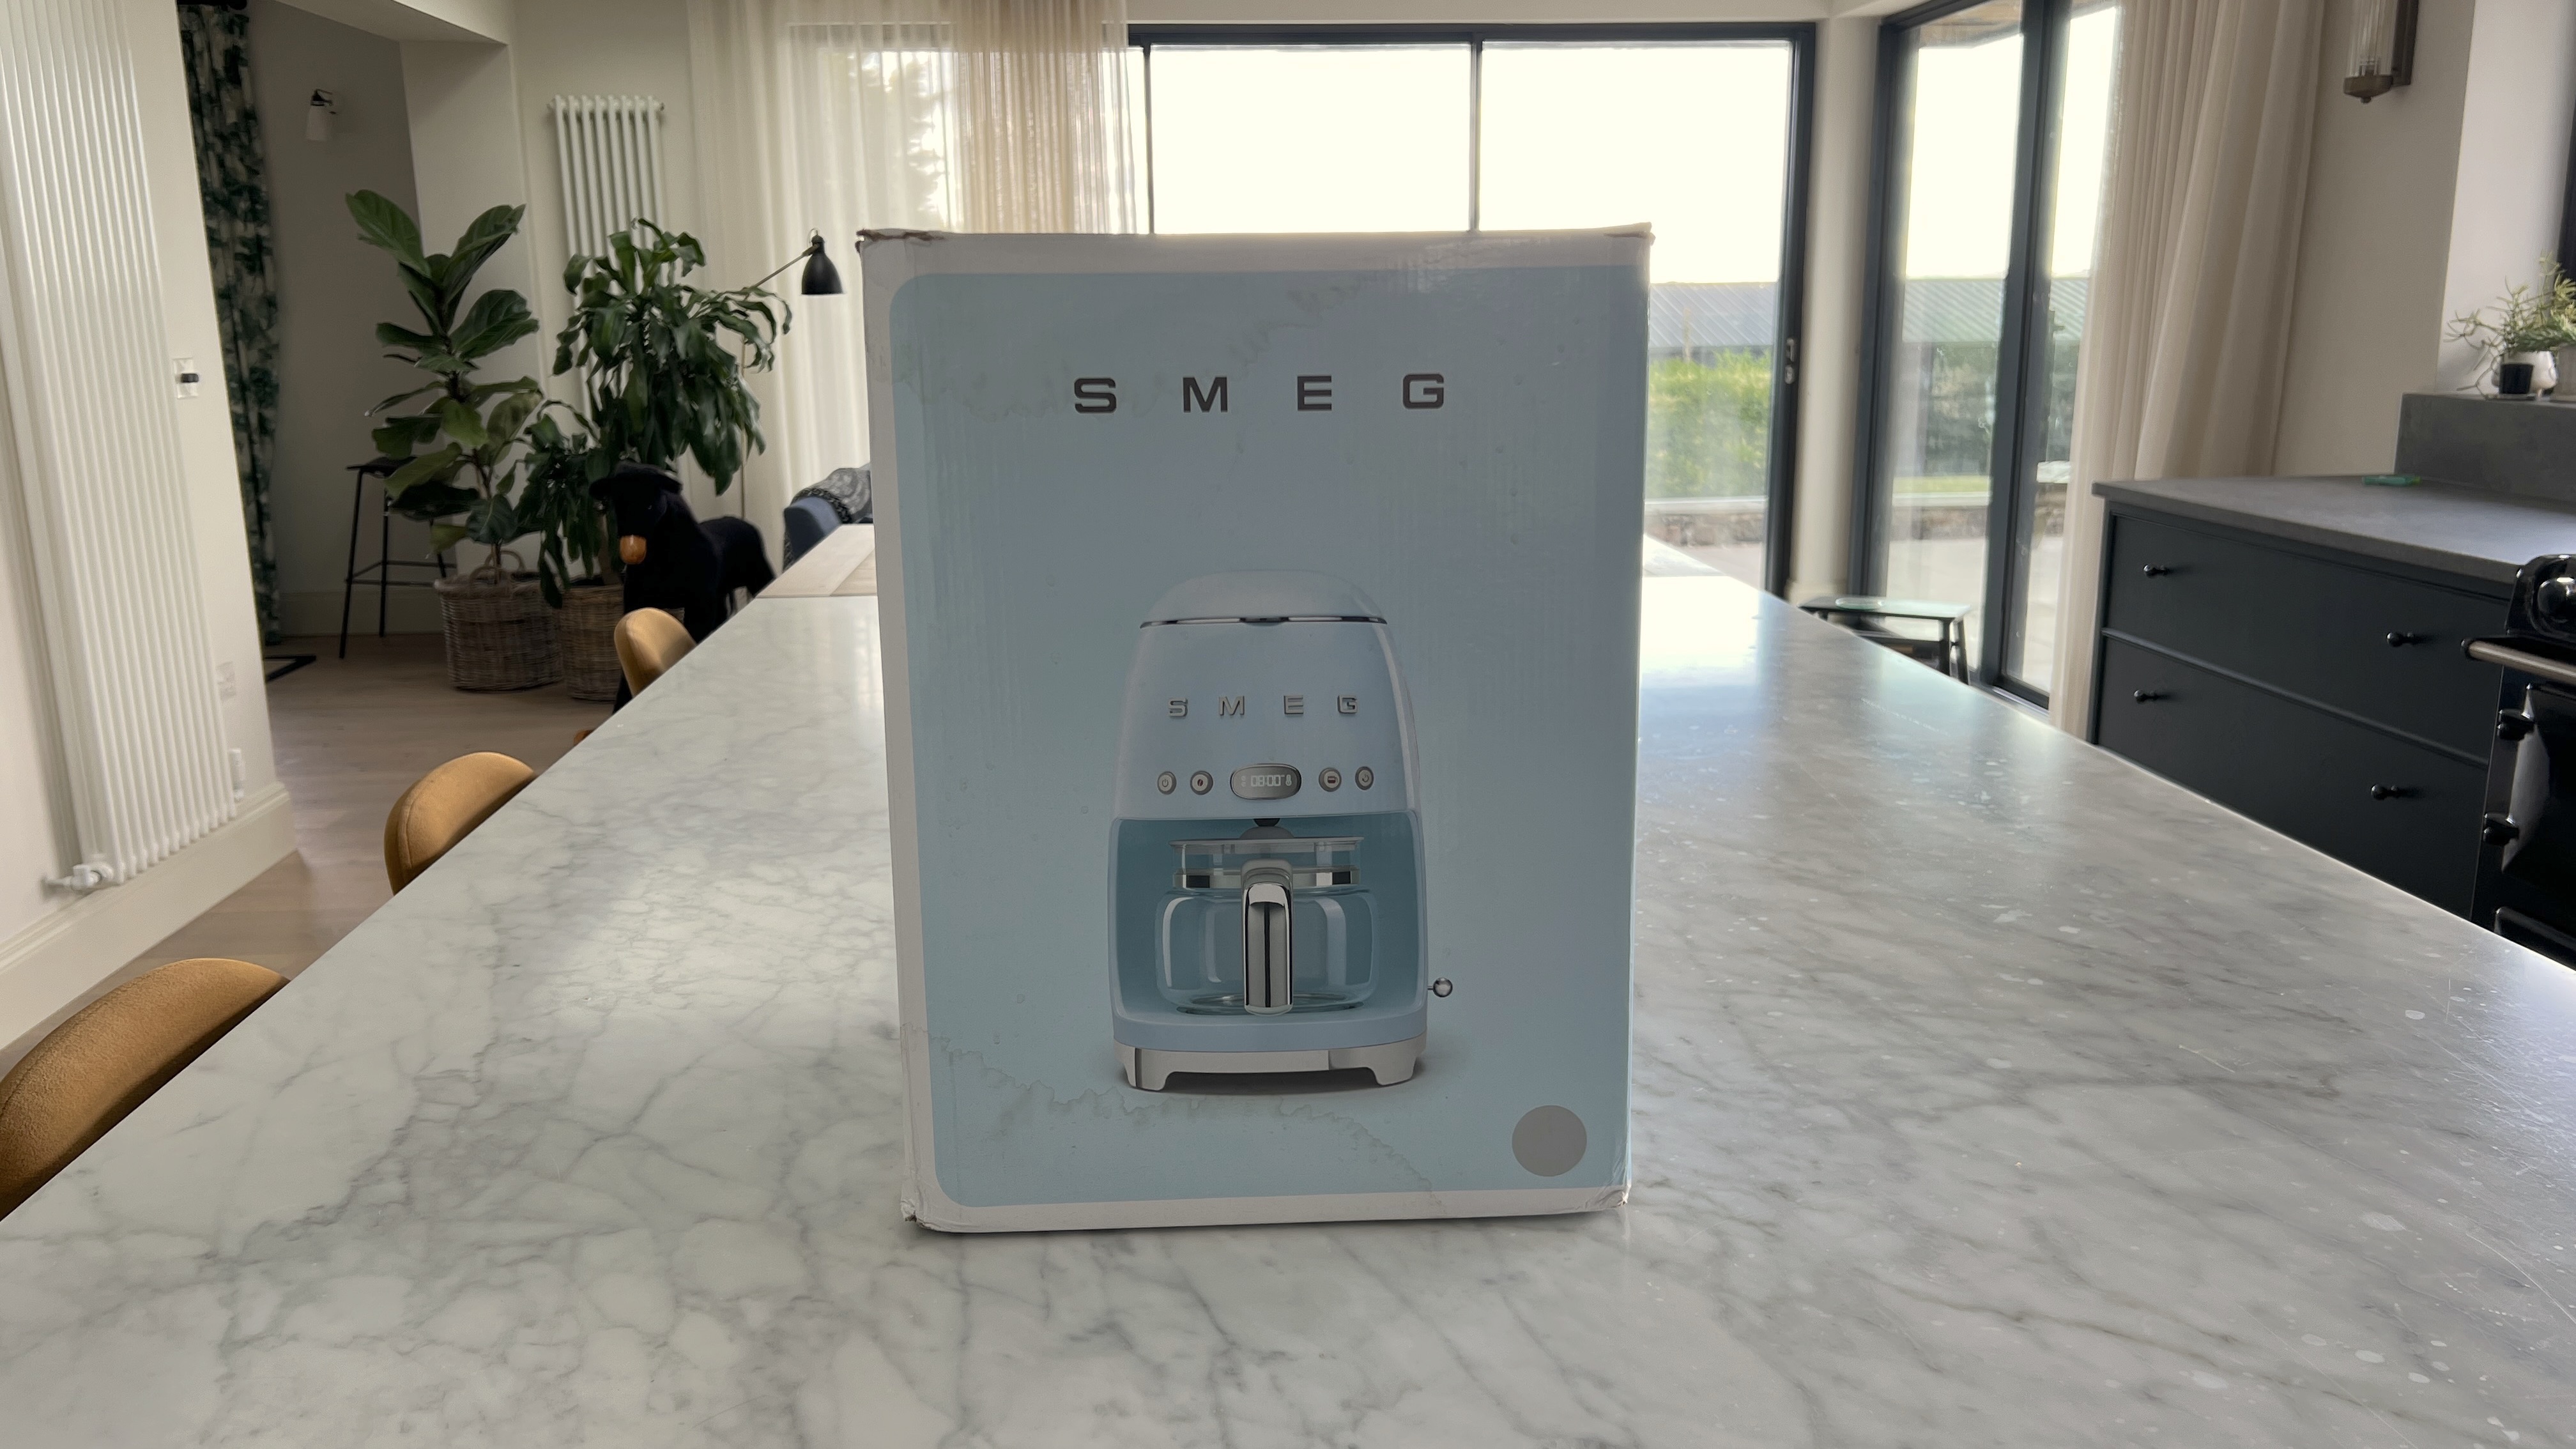 Smeg coffee machine packaging on counter